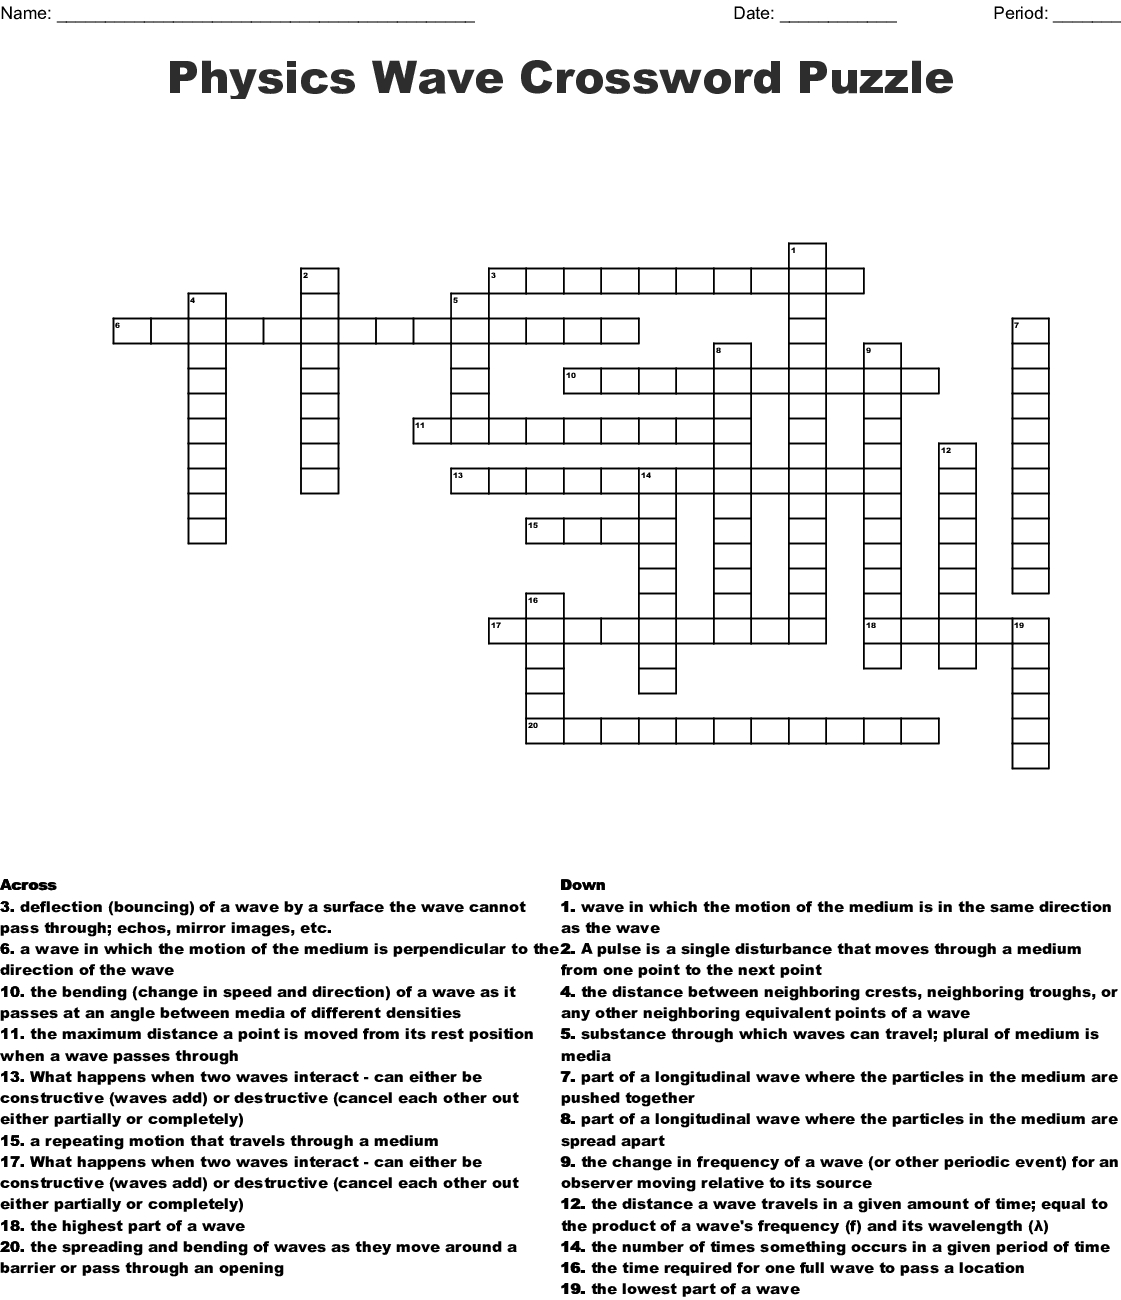 Physics Wave Crossword Puzzle Crossword - Wordmint - Physics Crossword Puzzles Printable With Answers